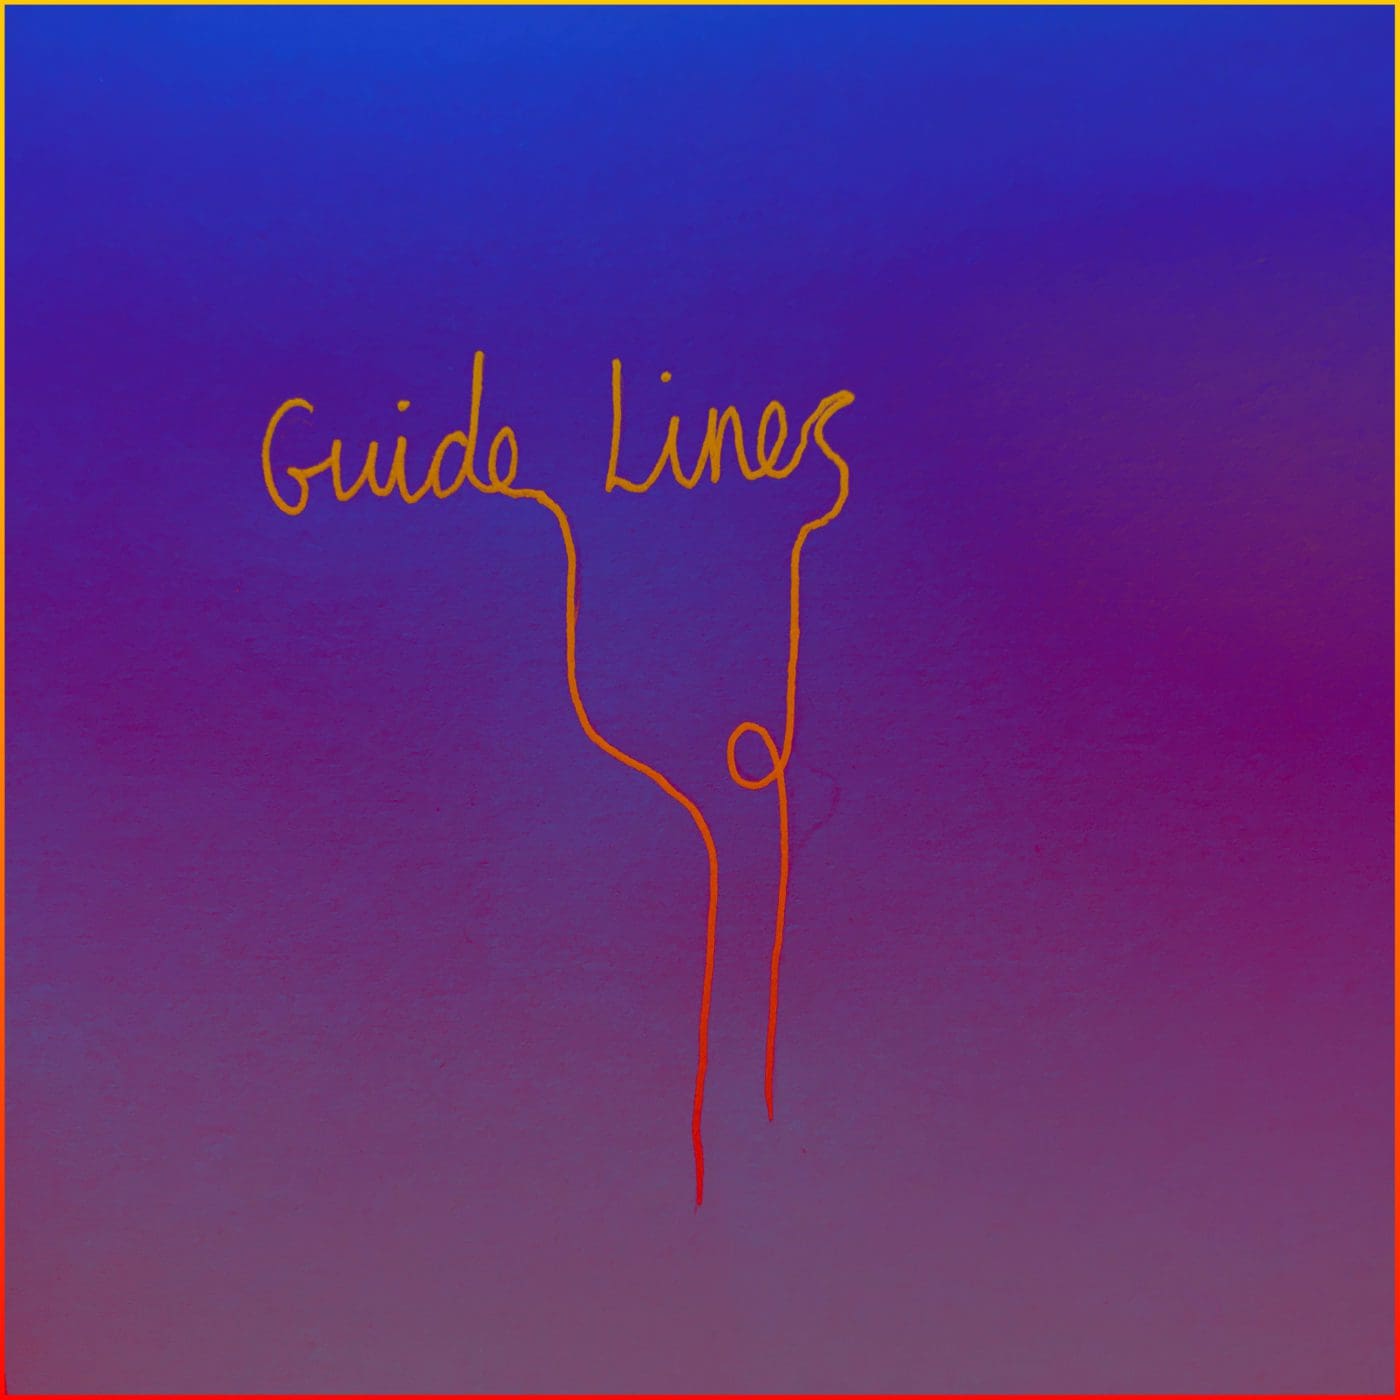 The words ‘Guide Lines’ are handwritten in orange on a vivid purple background. The ends of the words continue into string-like lines that fall and loop towards the bottom of the image.